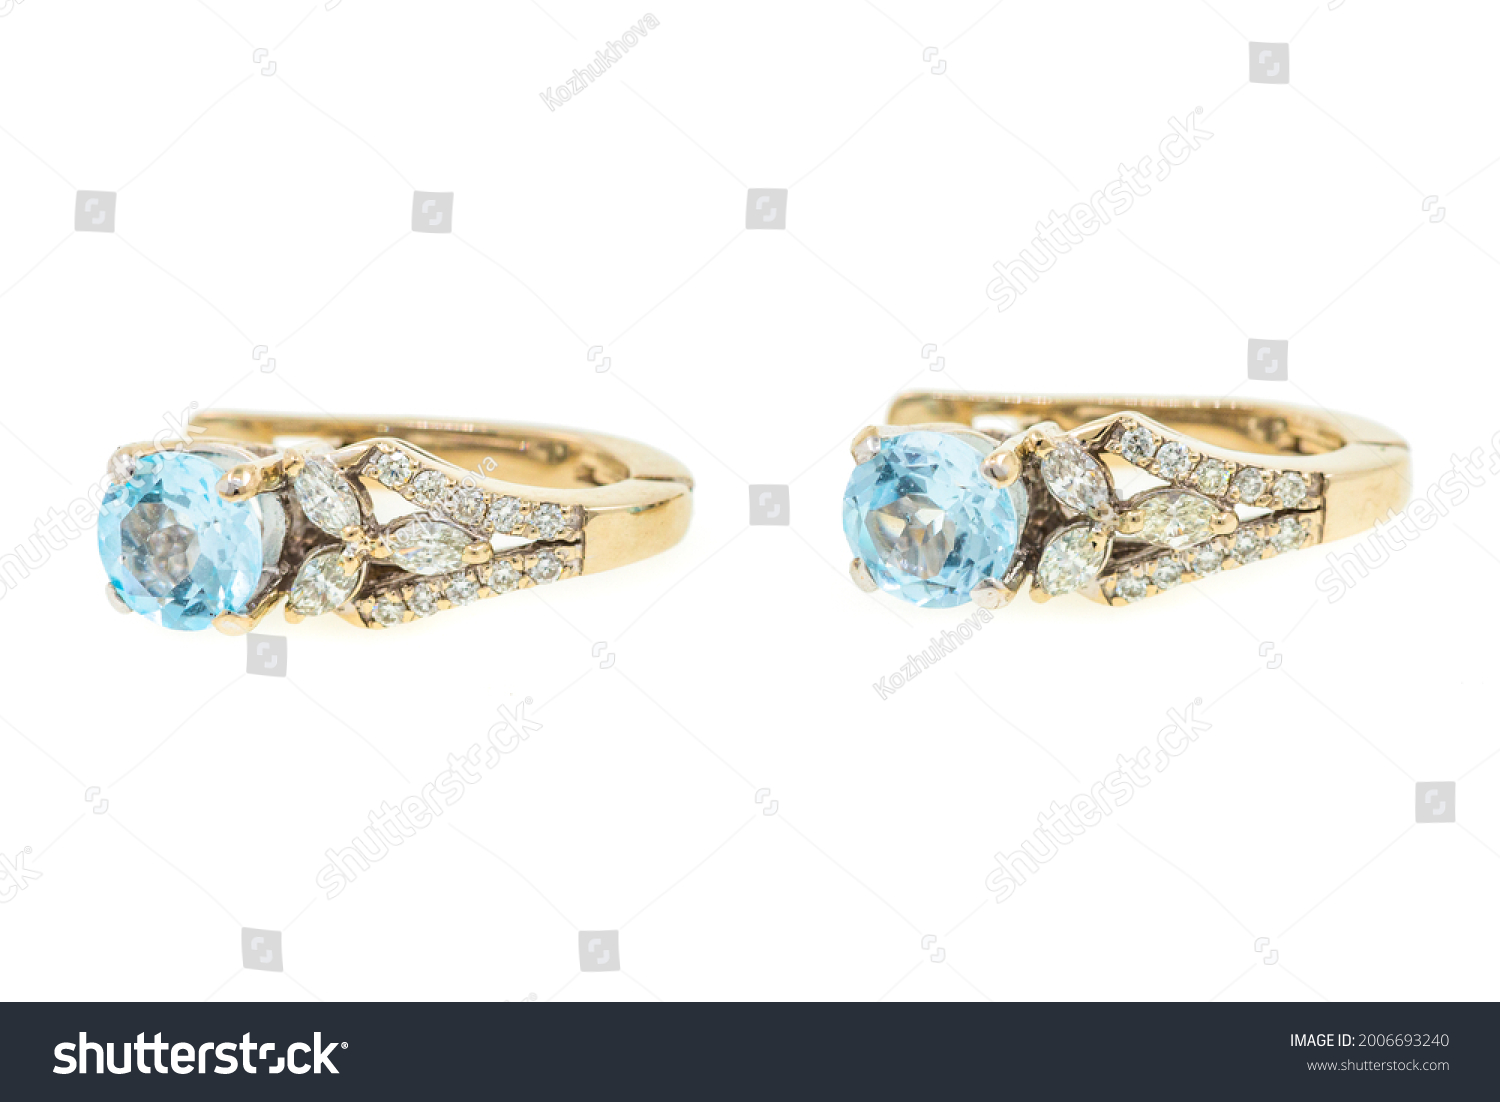 Gold earrings with blue topaz. The jewelry is isolated on a white background. Women's accessory #2006693240